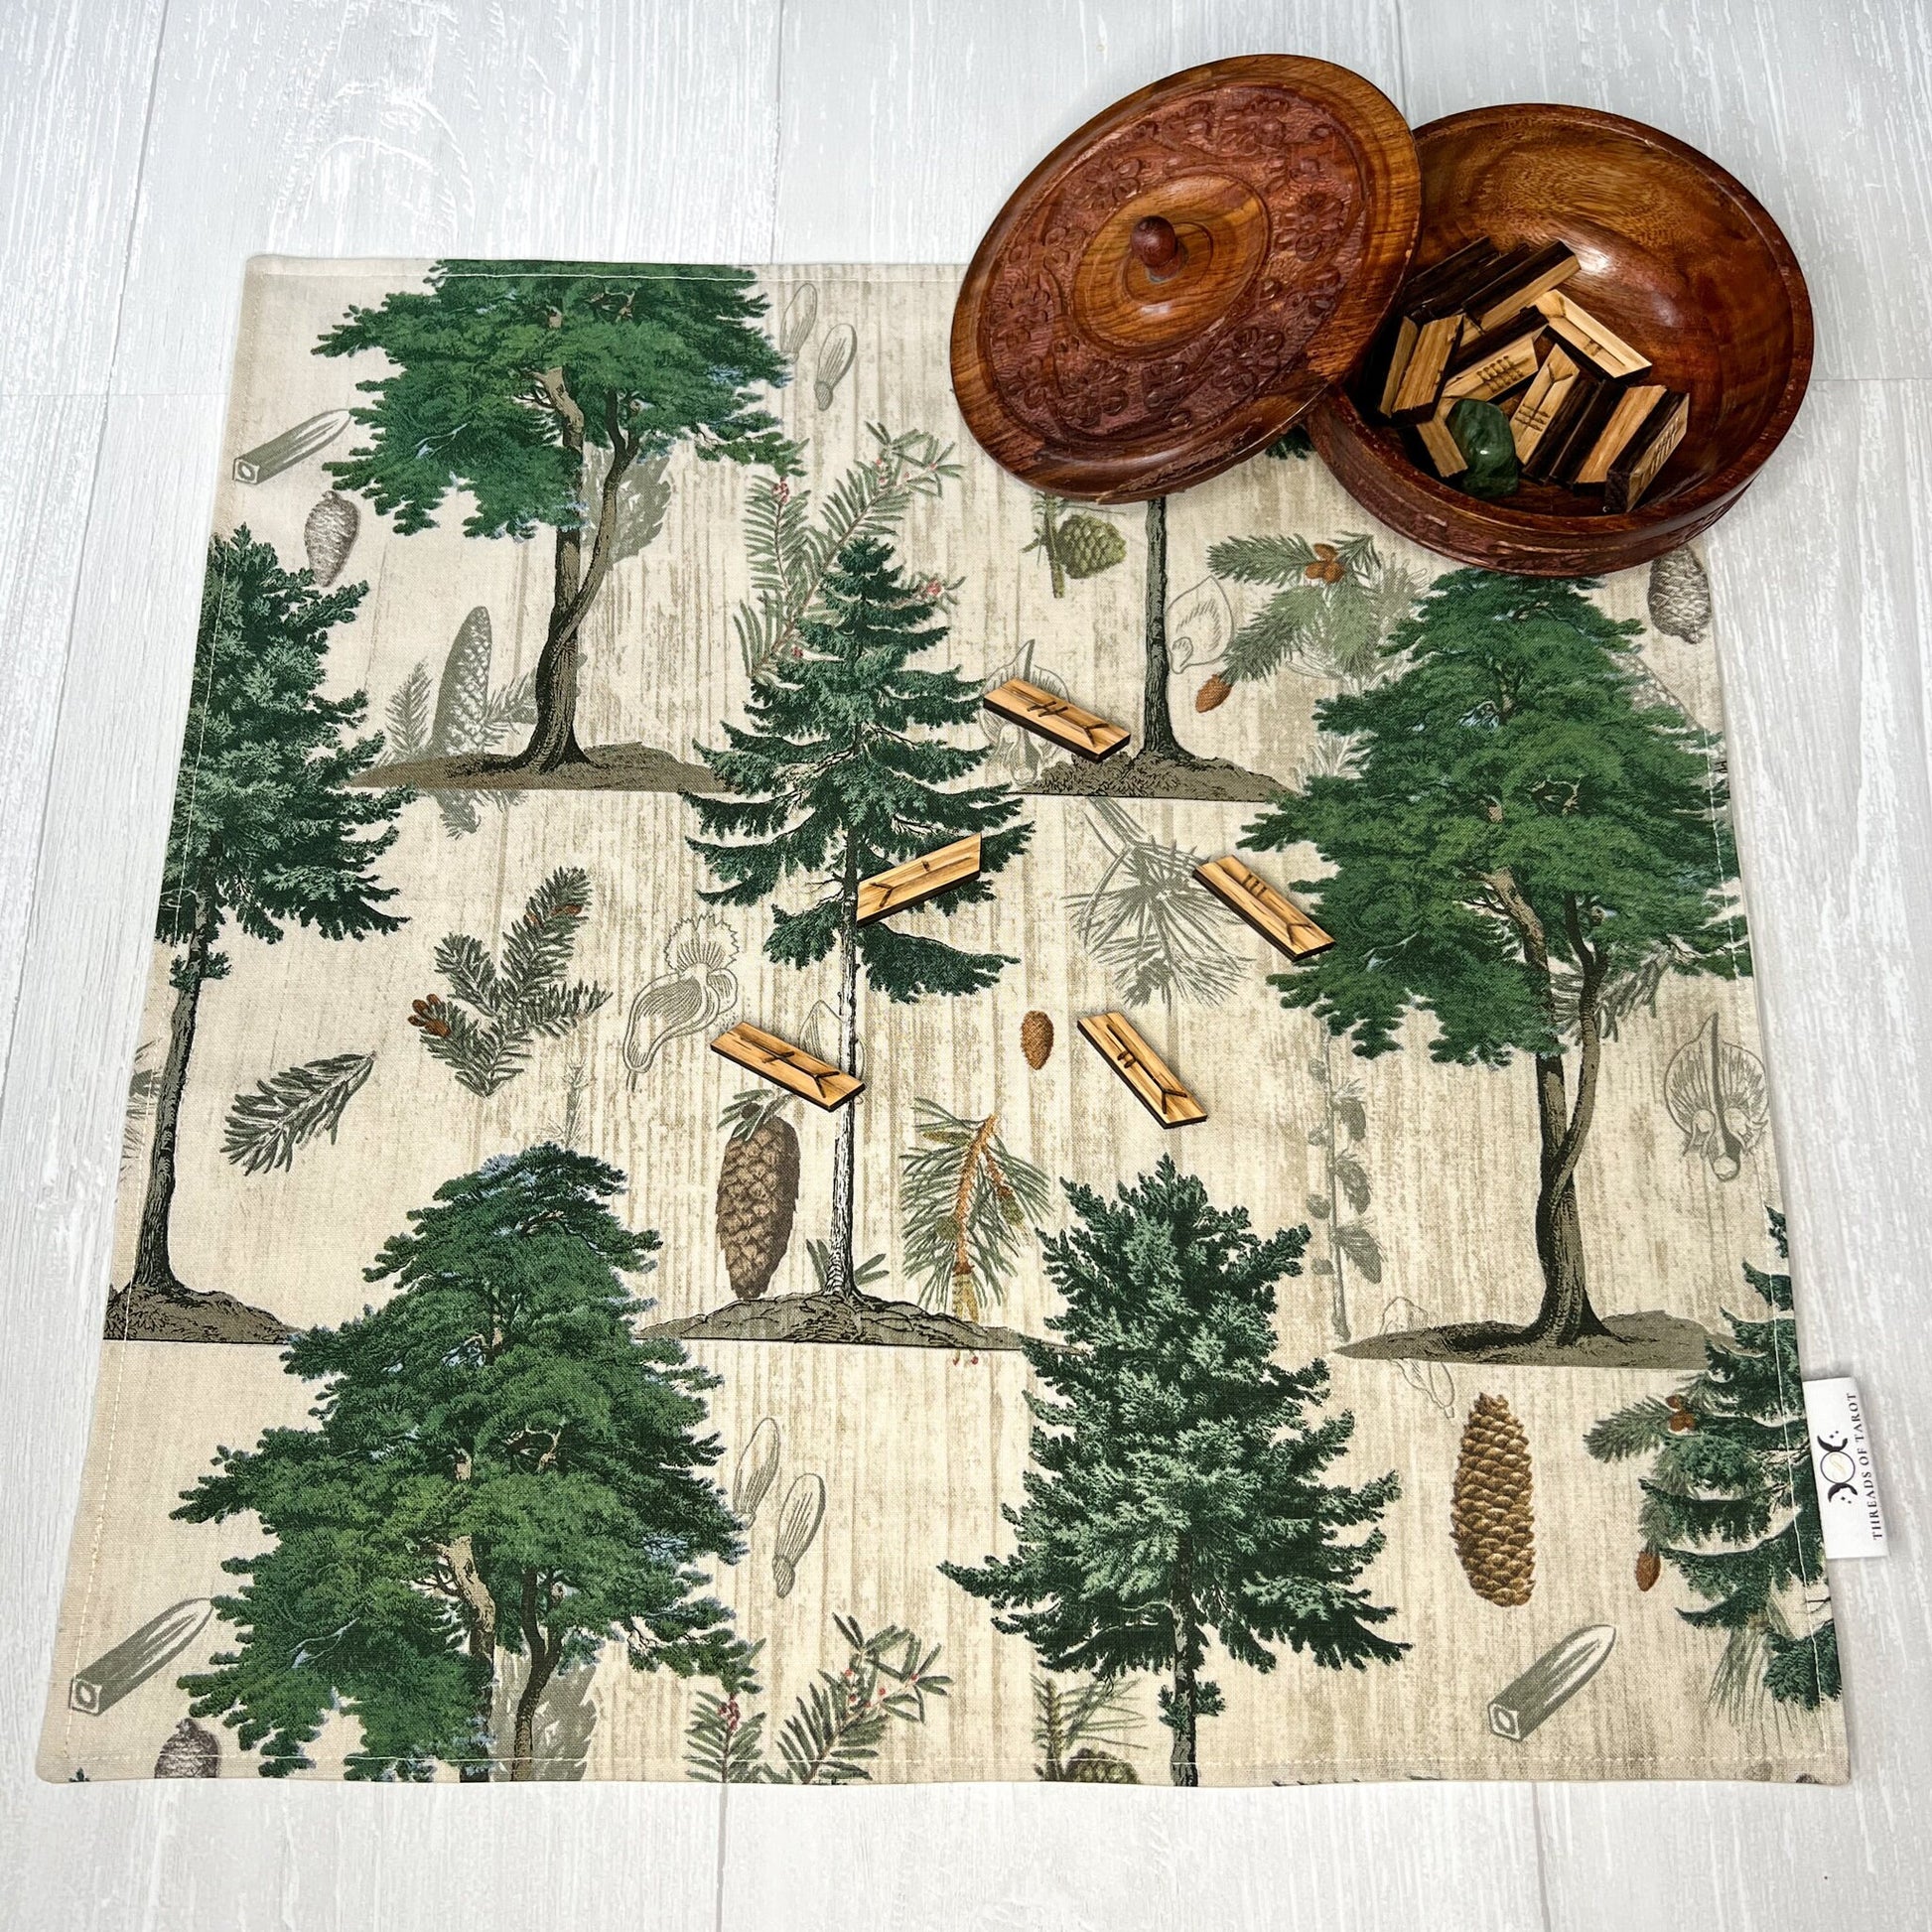 Tree Altar Cloth, Foresty Tarot Reading Cloth, Earthy Tarot Reading Supplies and Accessories, Rune Casting Cloth, Witch Tarot Reader Gifts